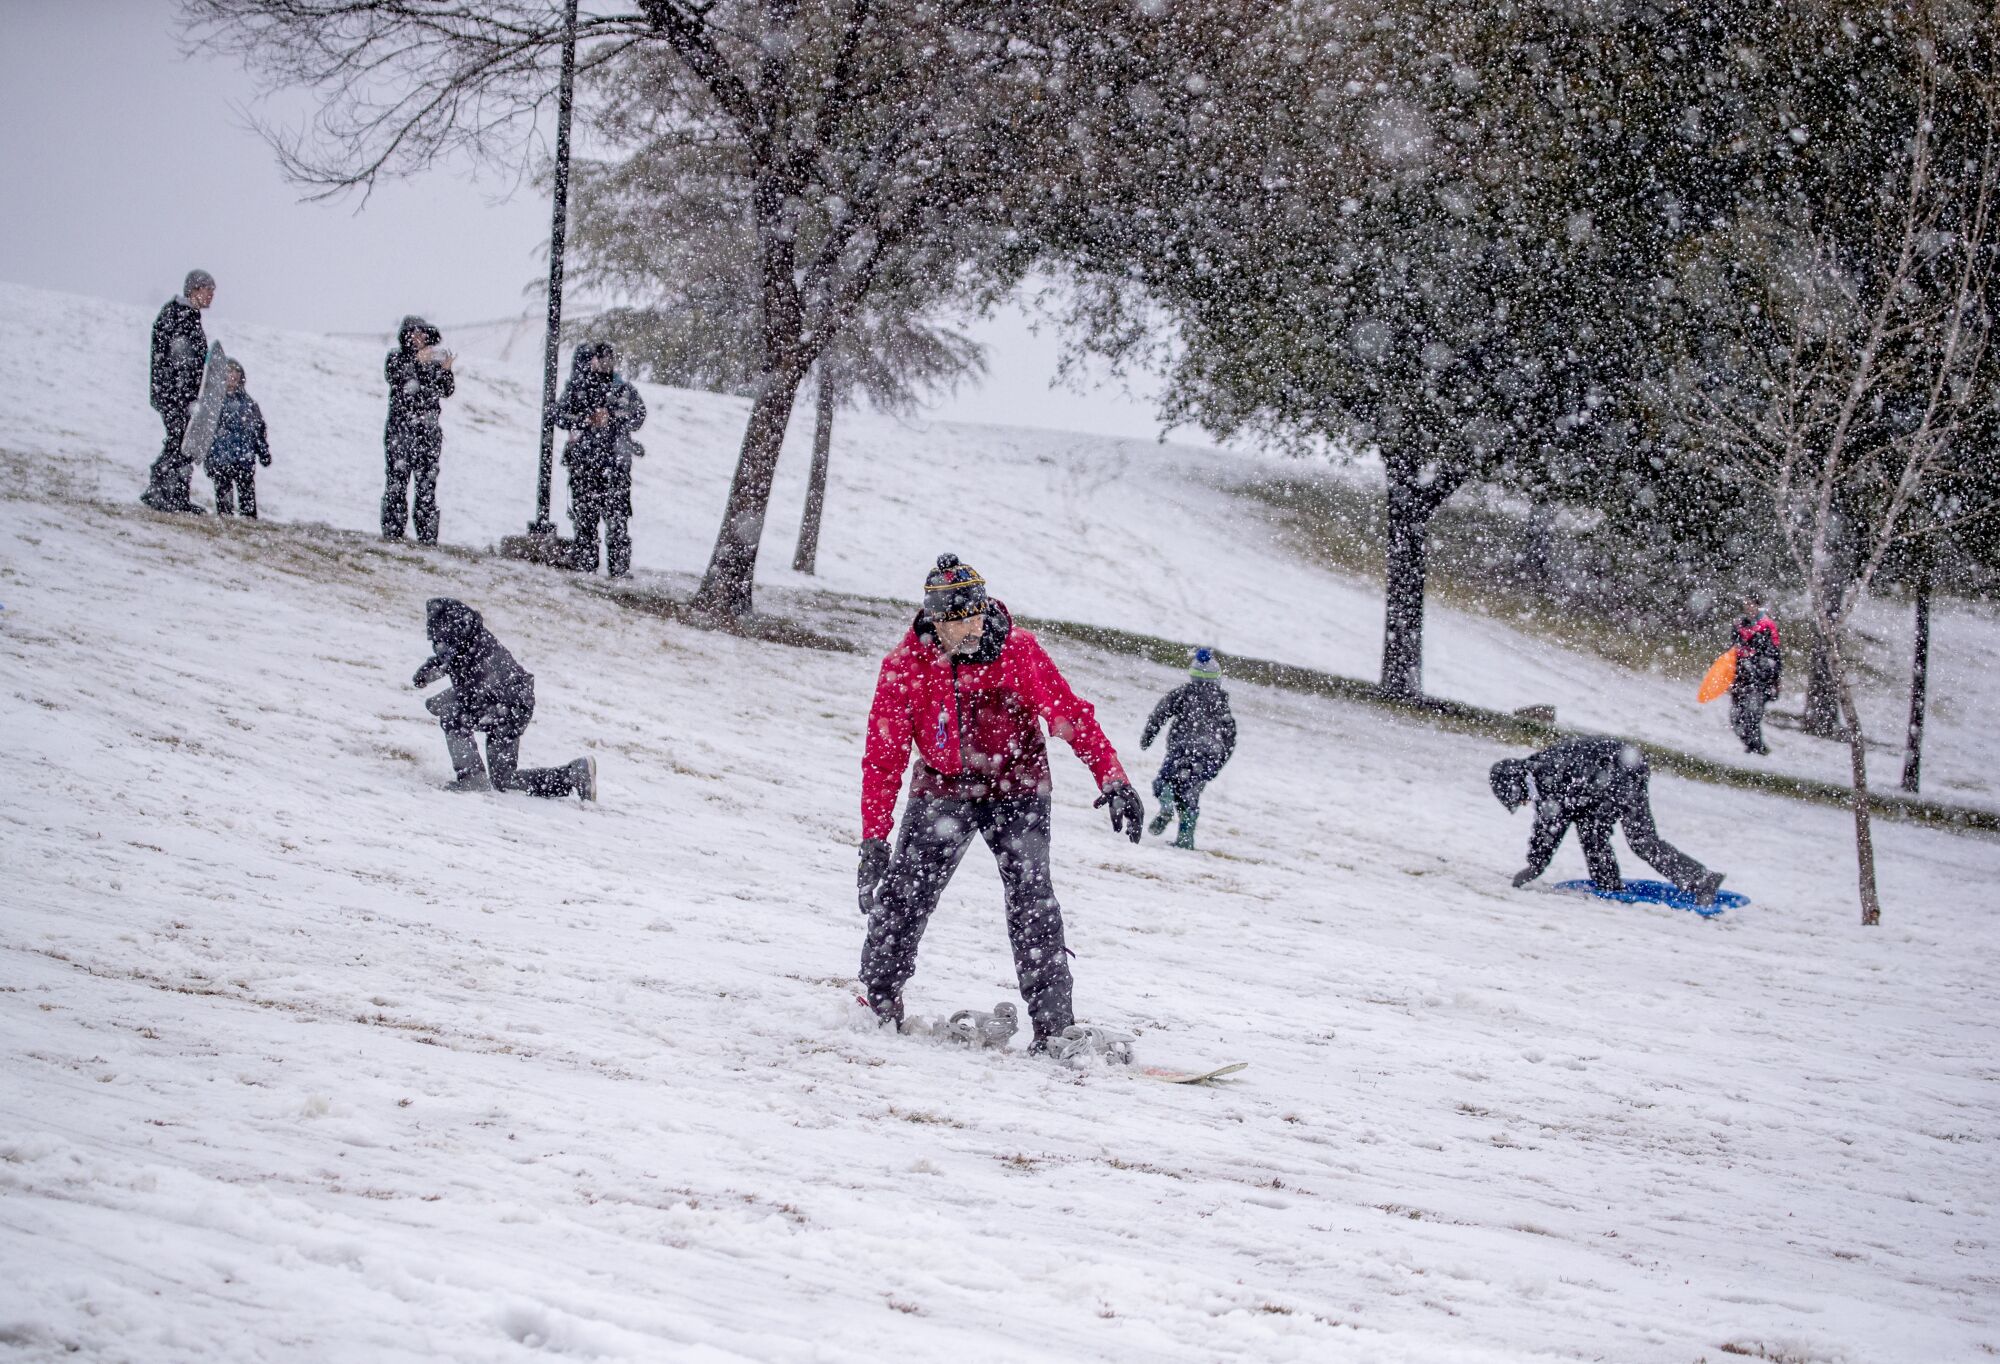 People snowboard and sled down a hill as snow still falls.